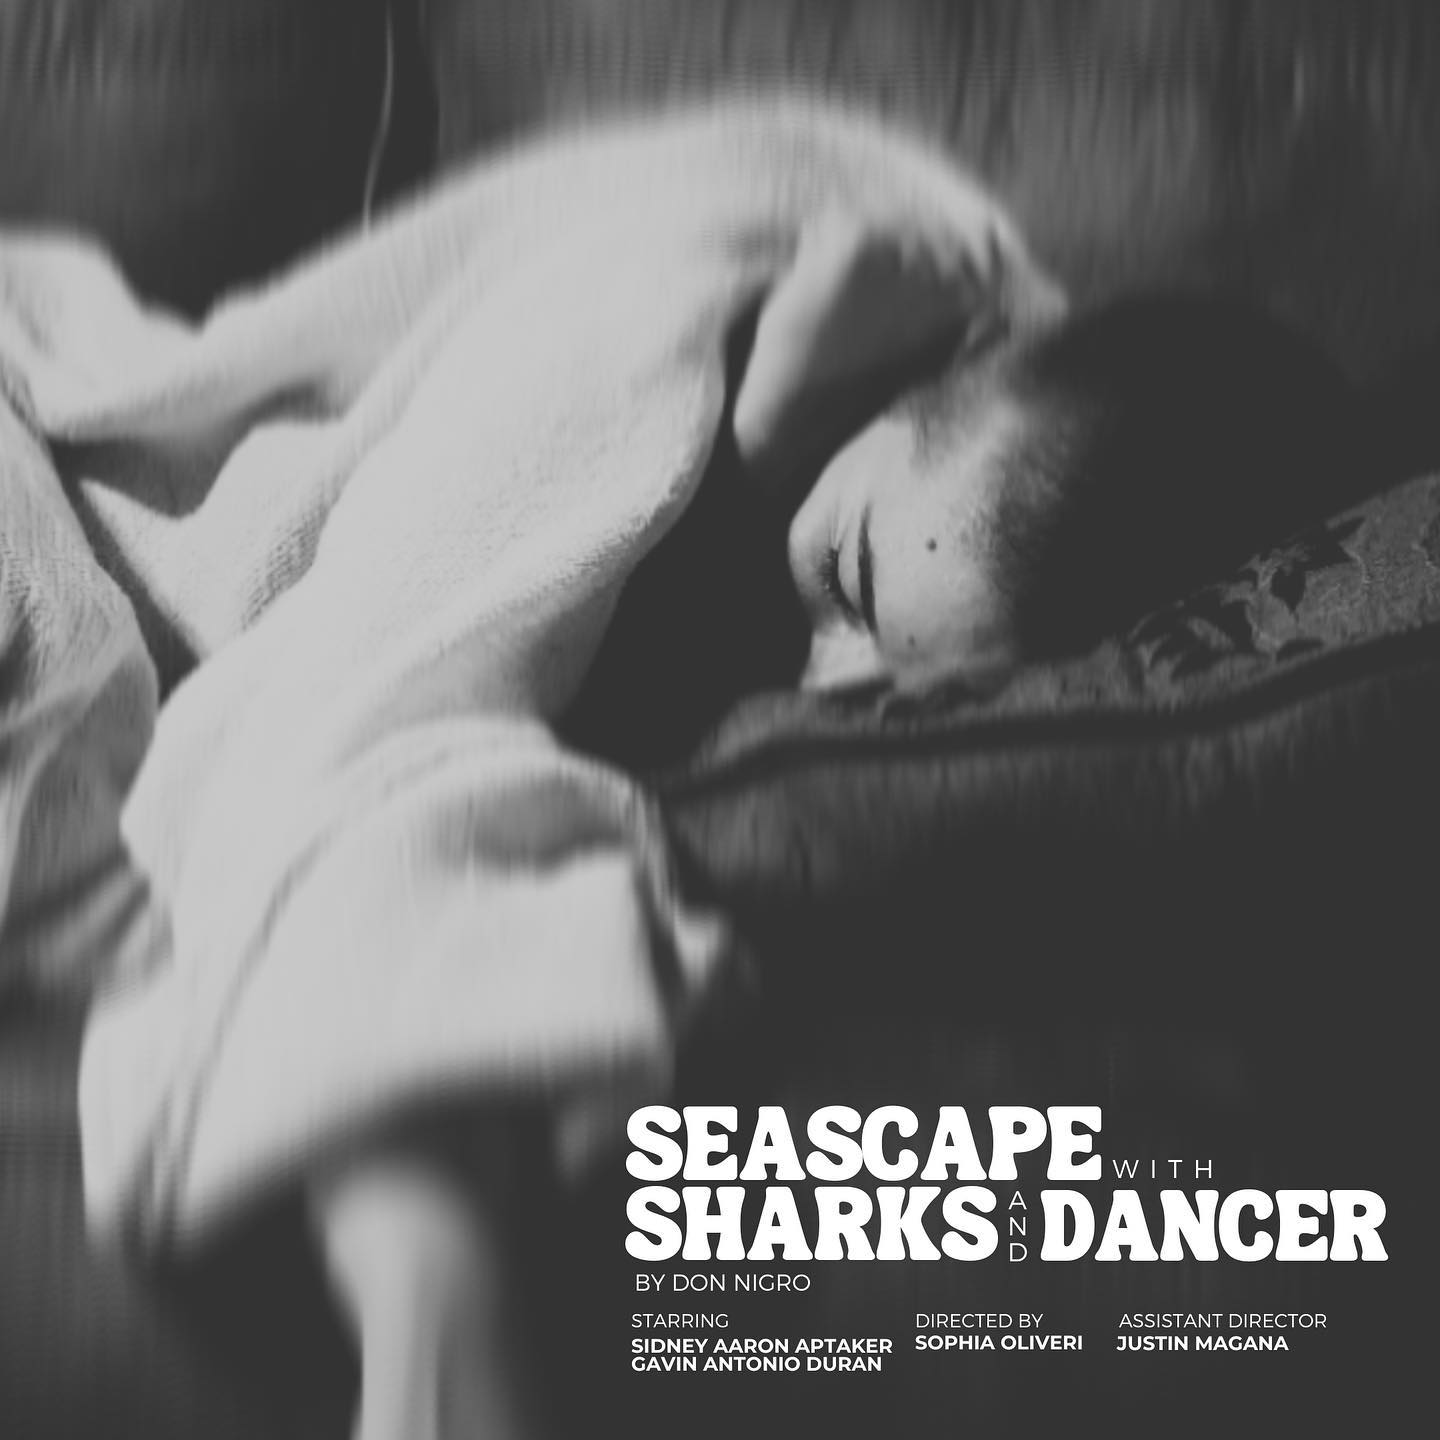 “SEASCAPE WITH SHARKS & DANCER” OPENS THIS FRIDAY!!! JUST TWO DAYS AWAY!! 🌊🦈🩰
•
You don’t want to miss it! Purchase your